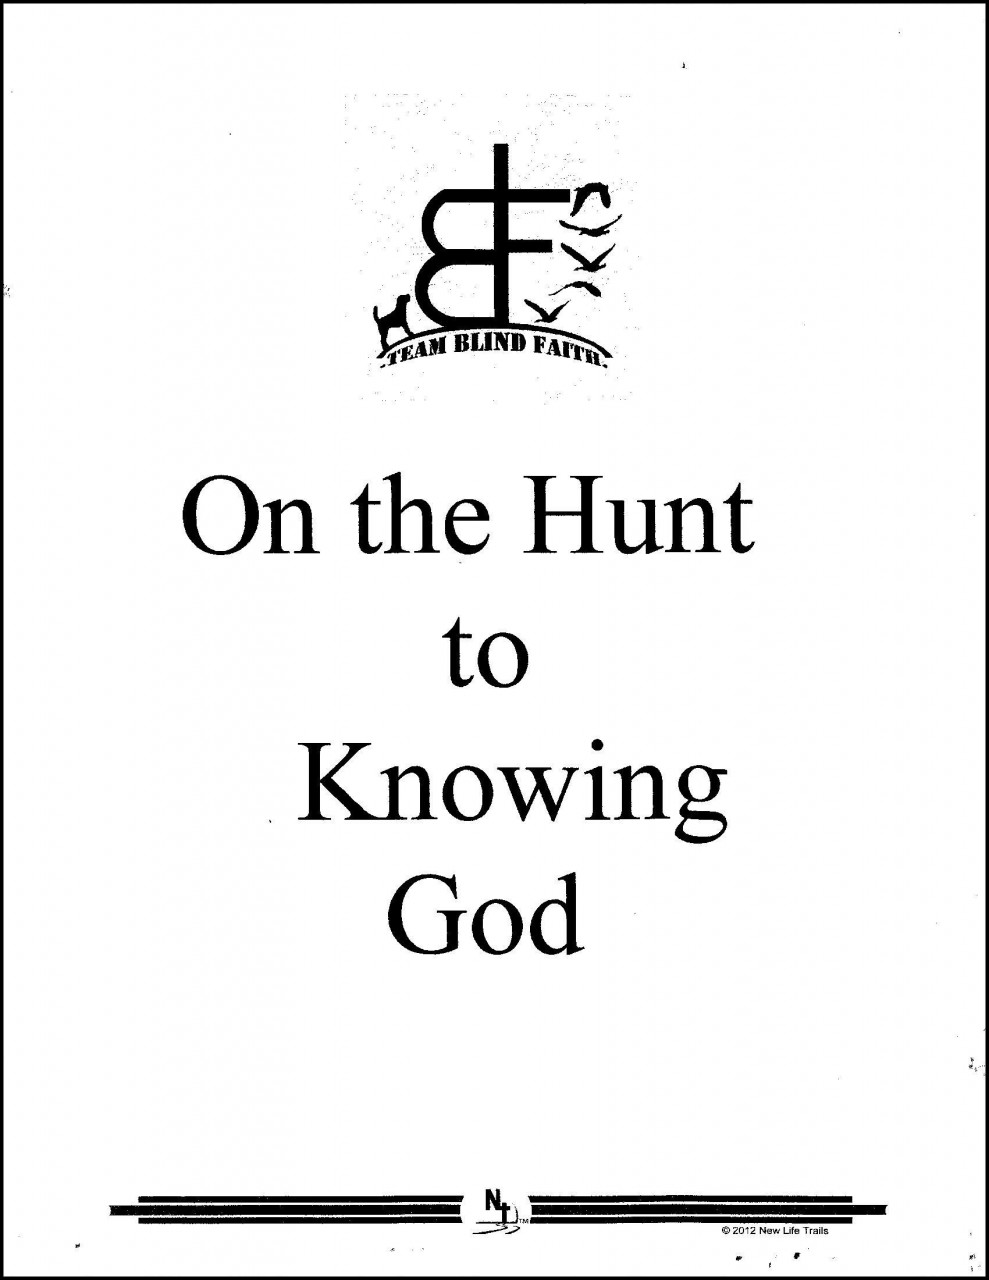  On the Hunt to Knowing God is the Bible study that Team Blind Faith uses while hunting. 